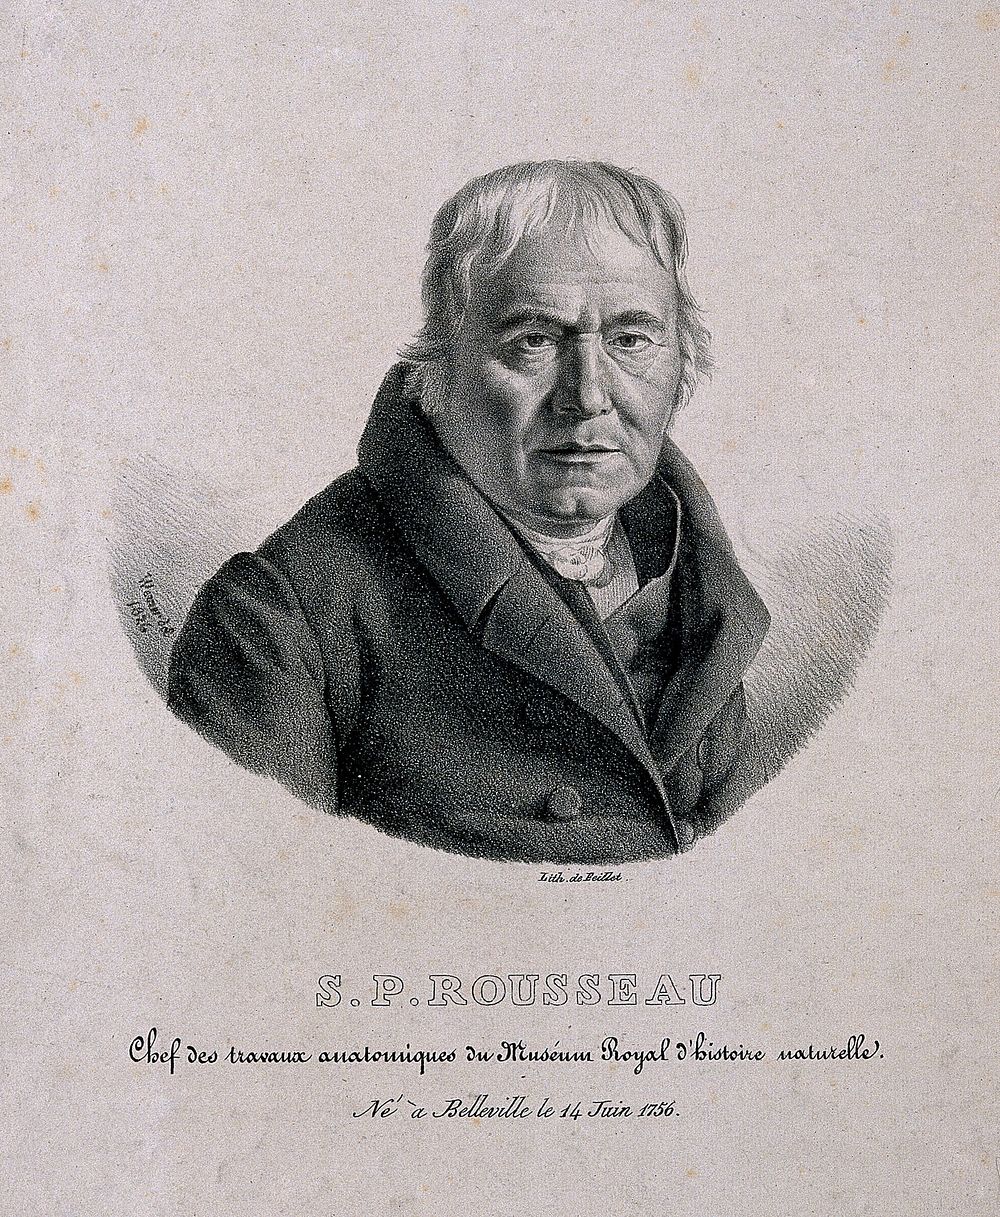 S. P. Rousseau. Lithograph by P.J. Feillet after Werner, 1826.